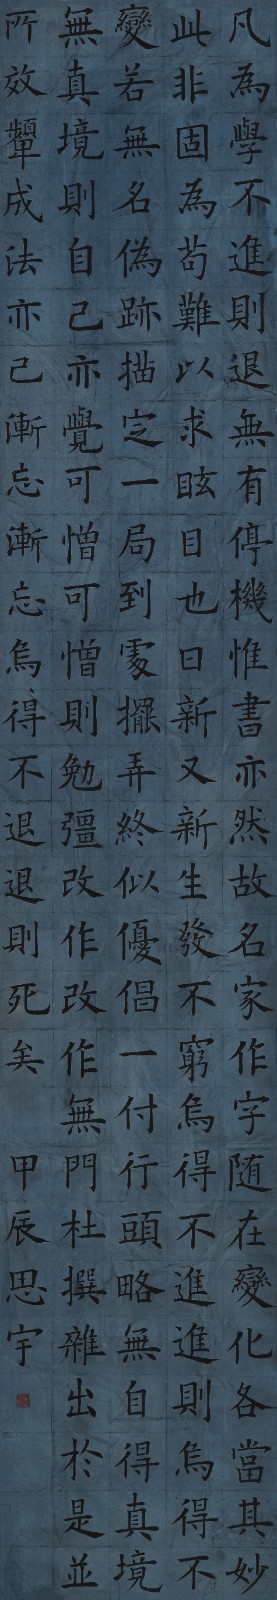 08 An article from “Hanshan Talk” by Zhao Huanguang in regular script, 40.5cm×235cm, Calligraphy on paper, 2024.jpg